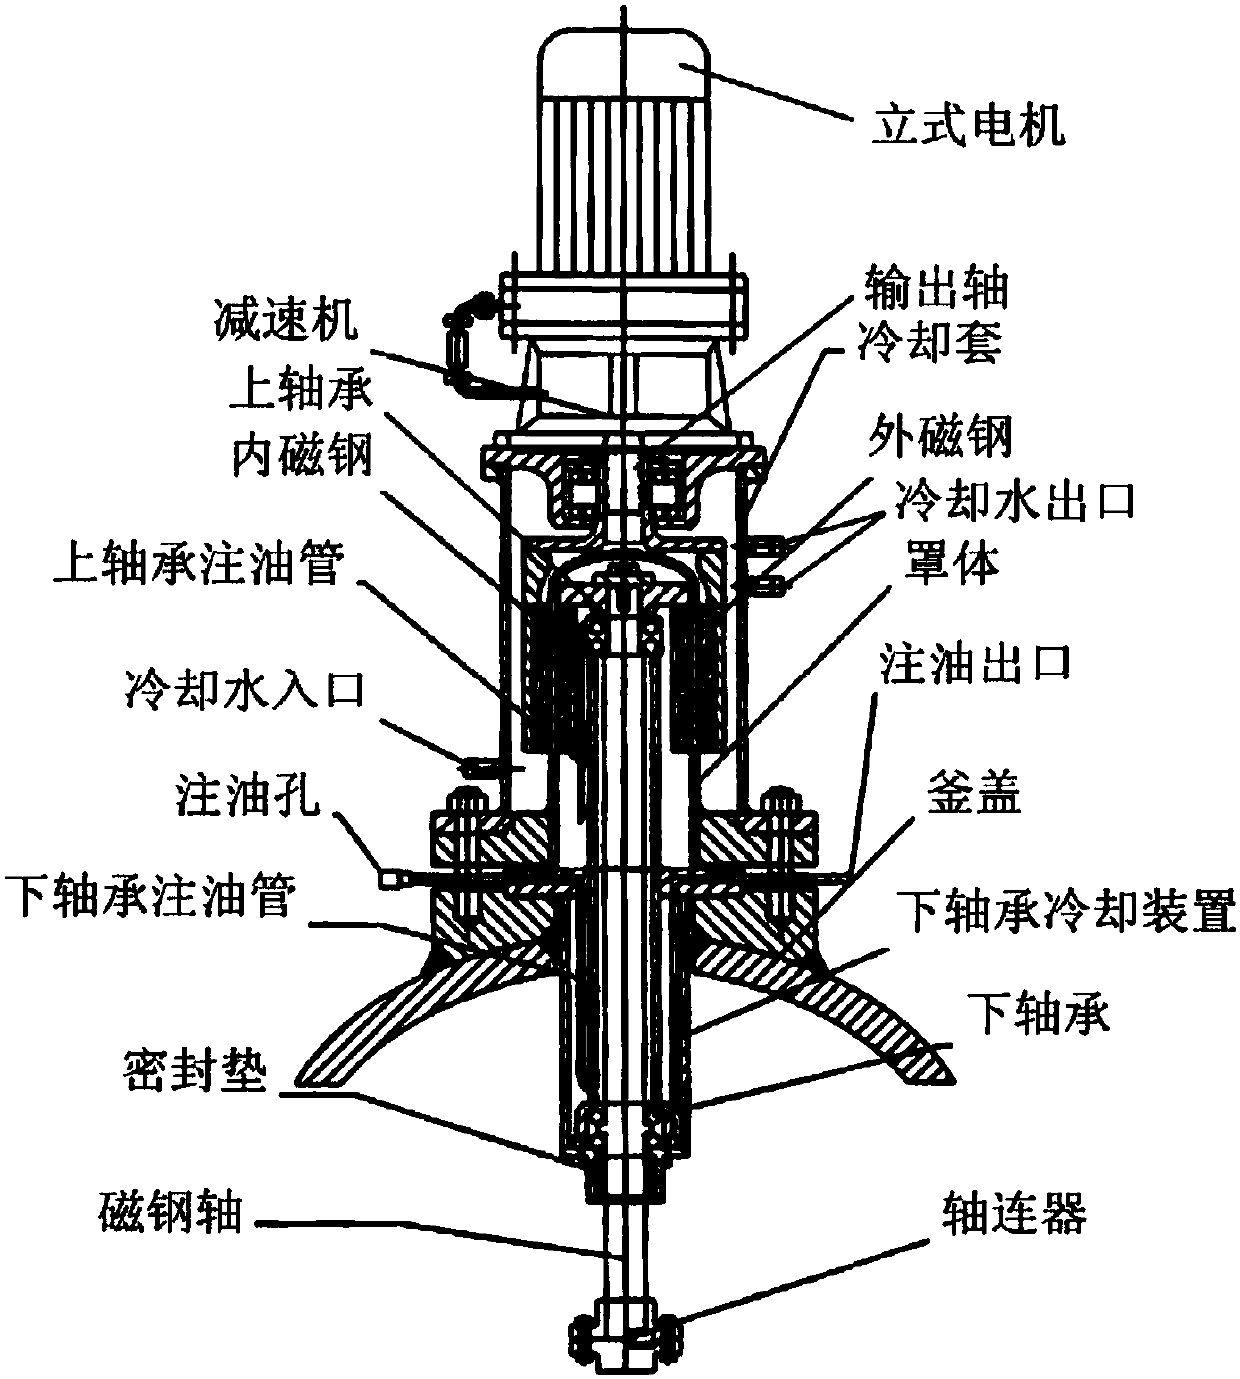 Chemical mechanical system using electromagnetically driven reactor